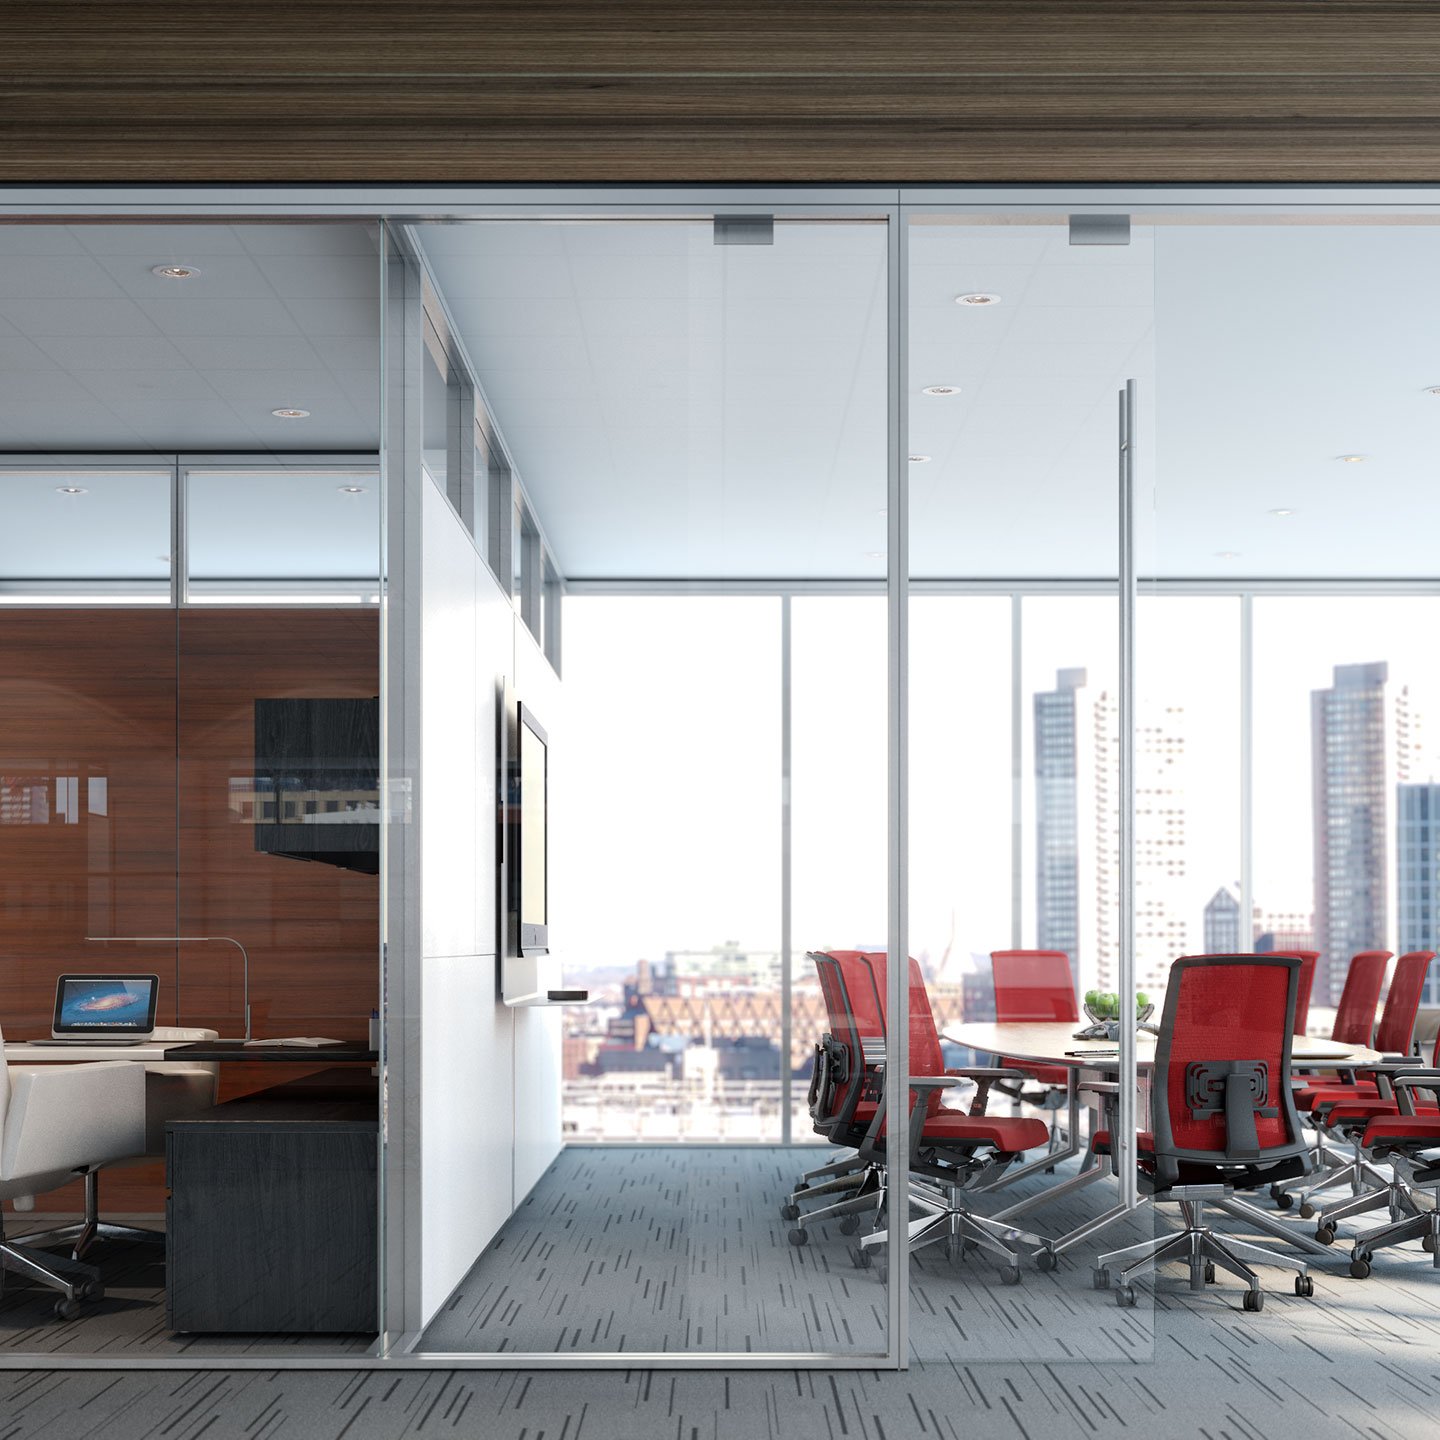 Haworth Enclose Frameless Glass Walls in office closed meeting room with white table and red chairs next to office with desk 